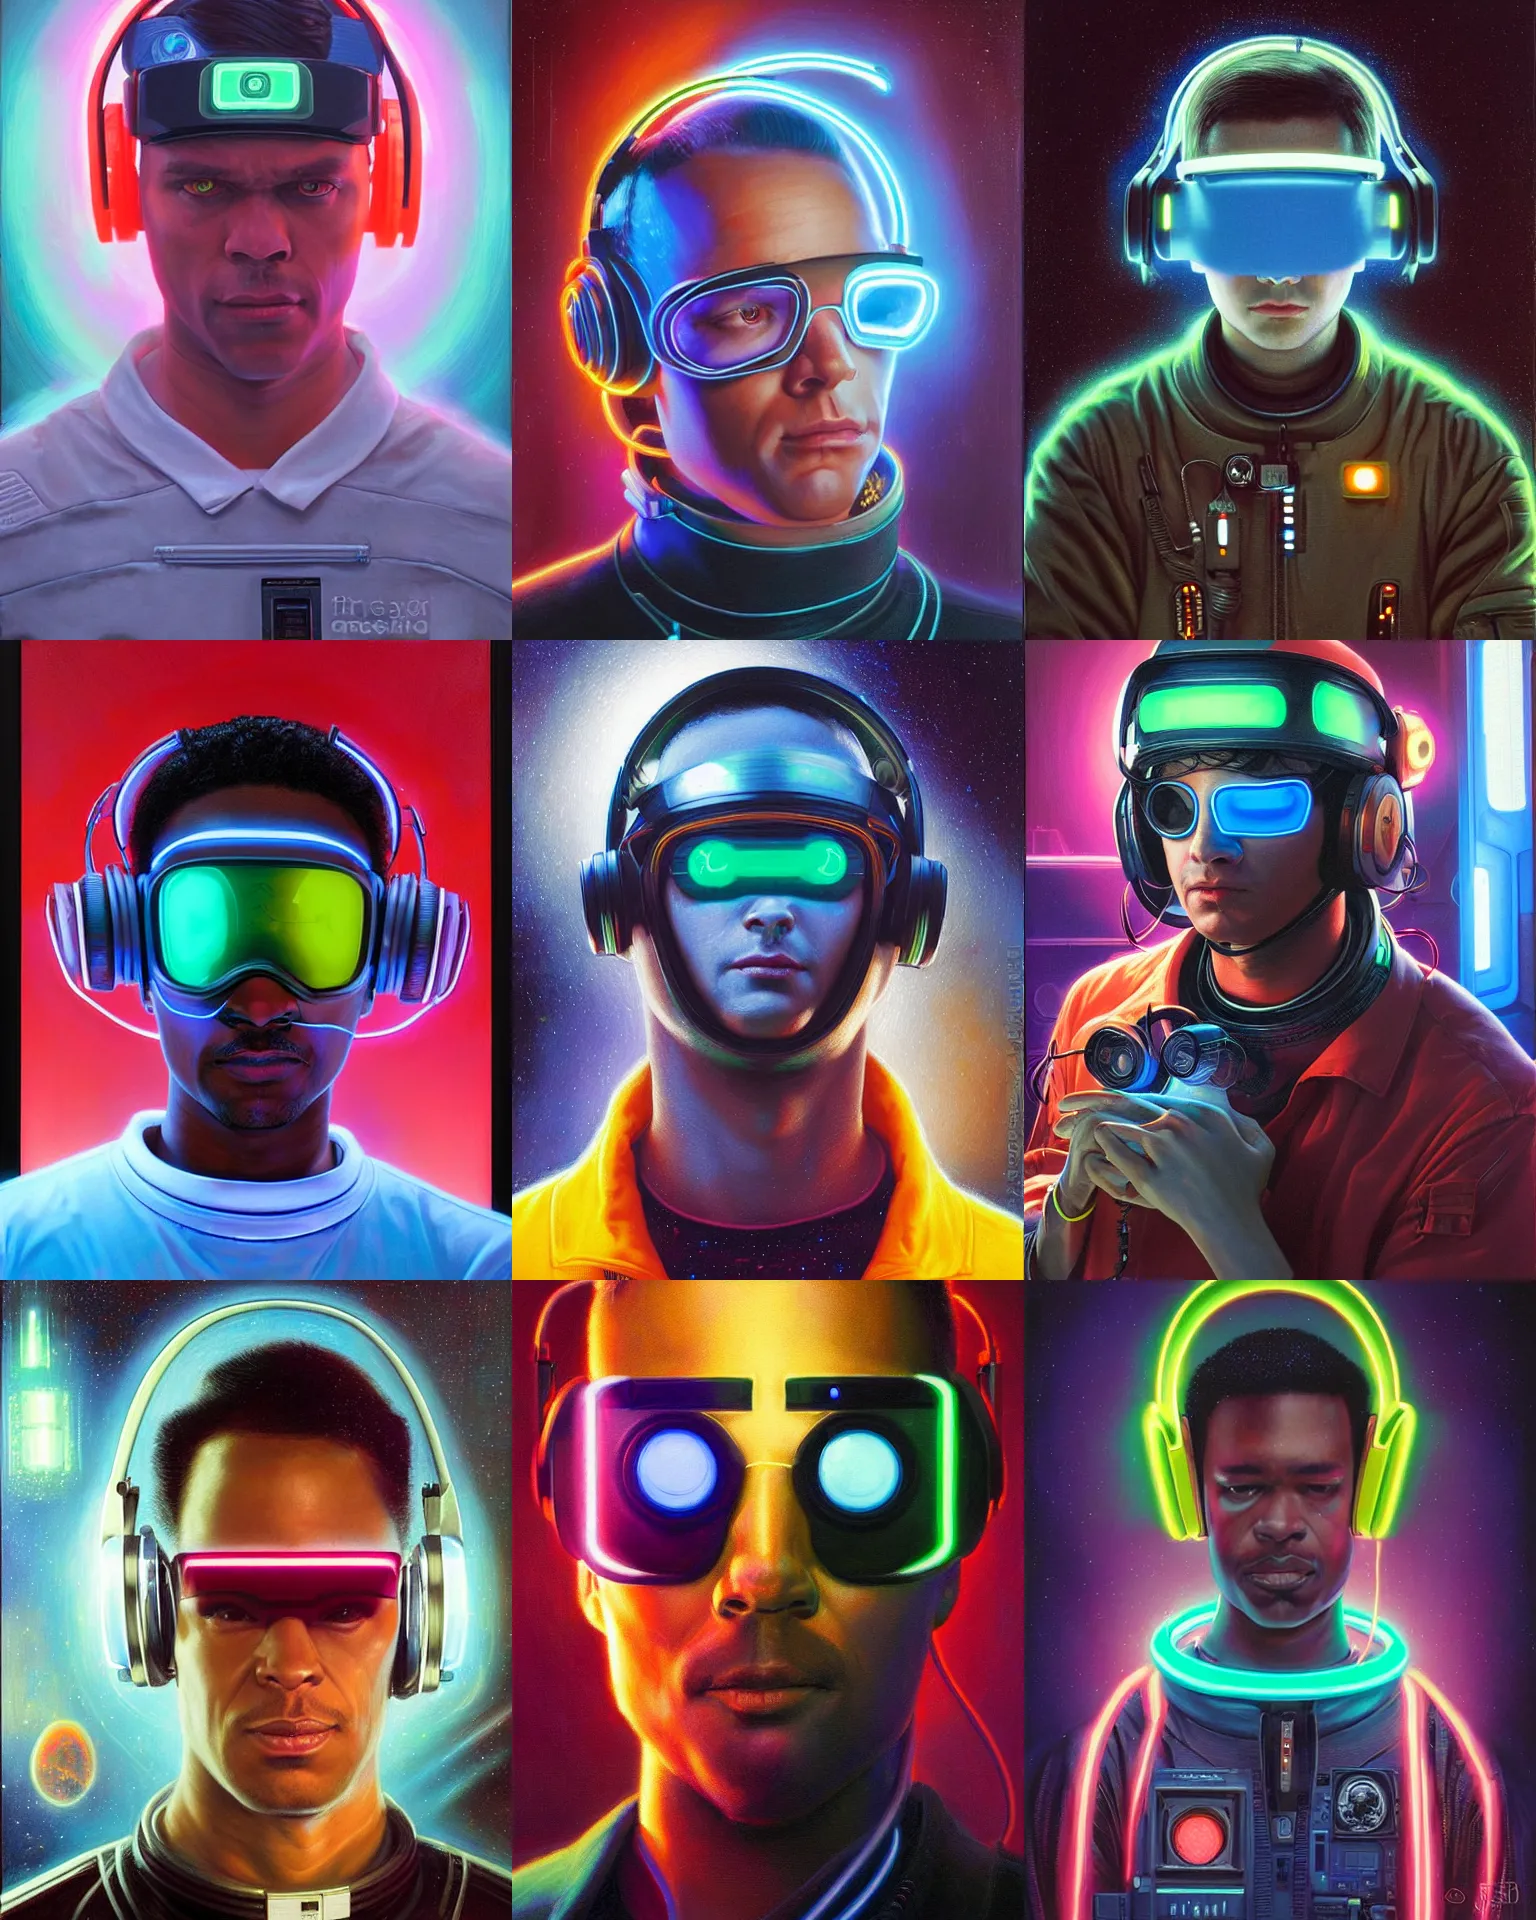 Prompt: neon cyberpunk programmer with glowing geordi visor over eyes and sleek headphones headshot desaturated portrait painting by donato giancola, dean cornwall, rhads, tom whalen, alex grey astronaut fashion photography